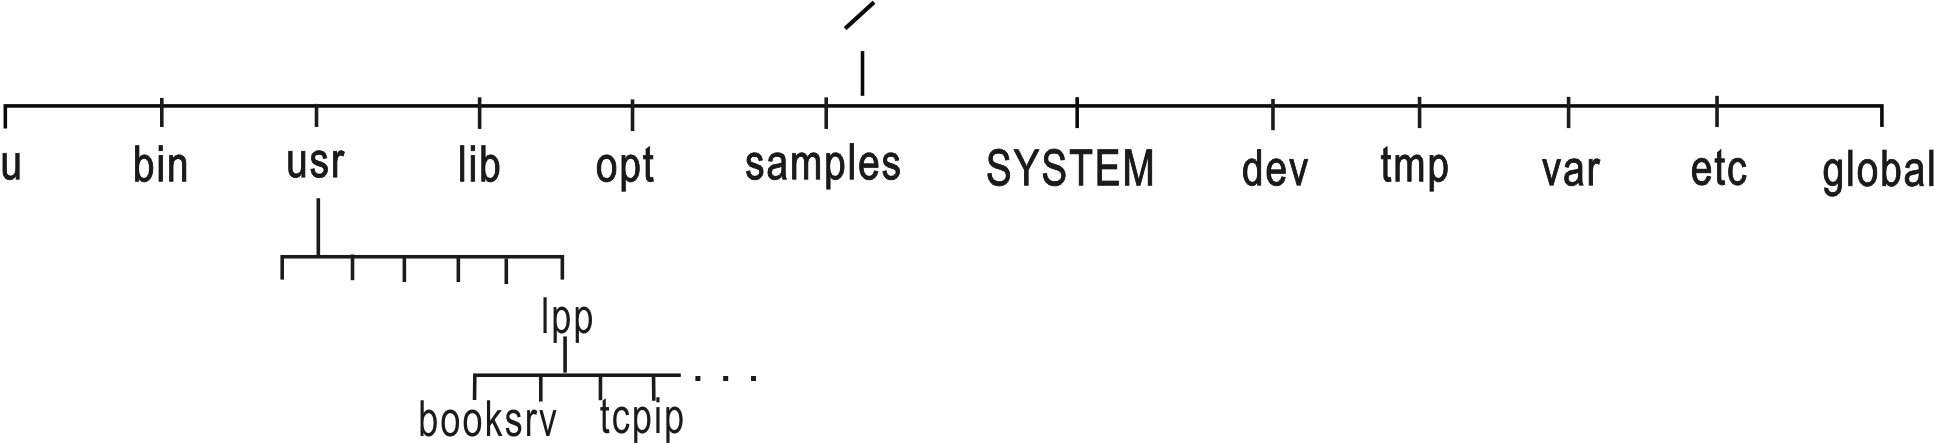 How the hierarchical file system looks to the user